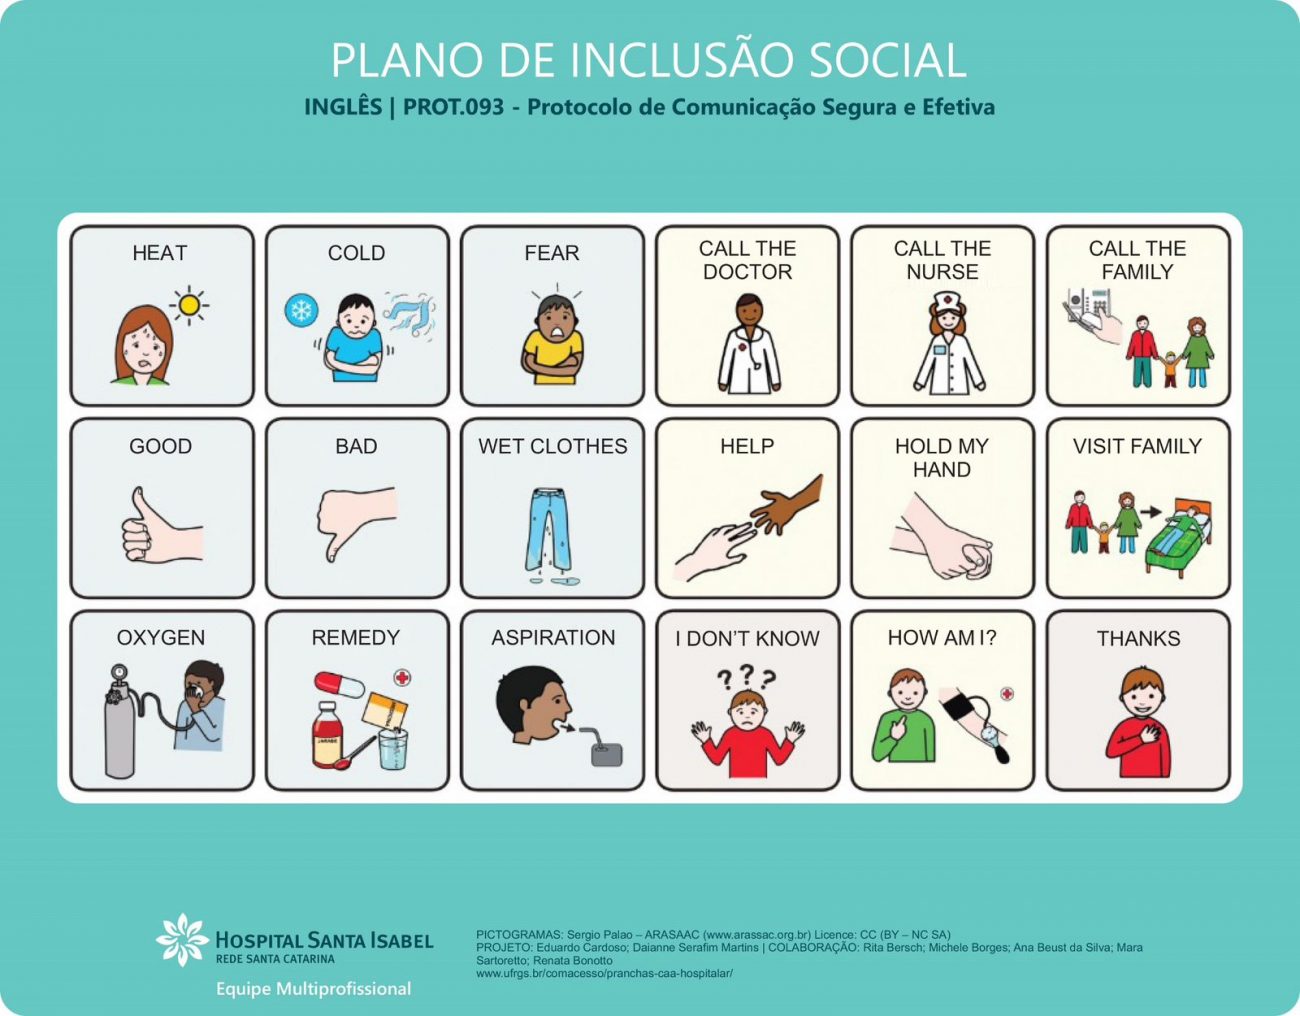 The initiative came about through the hospital's social inclusion committee, with a focus on finding solutions for patients who face communication problems - Philip Oliveira/Priscila Barcellos/HSI